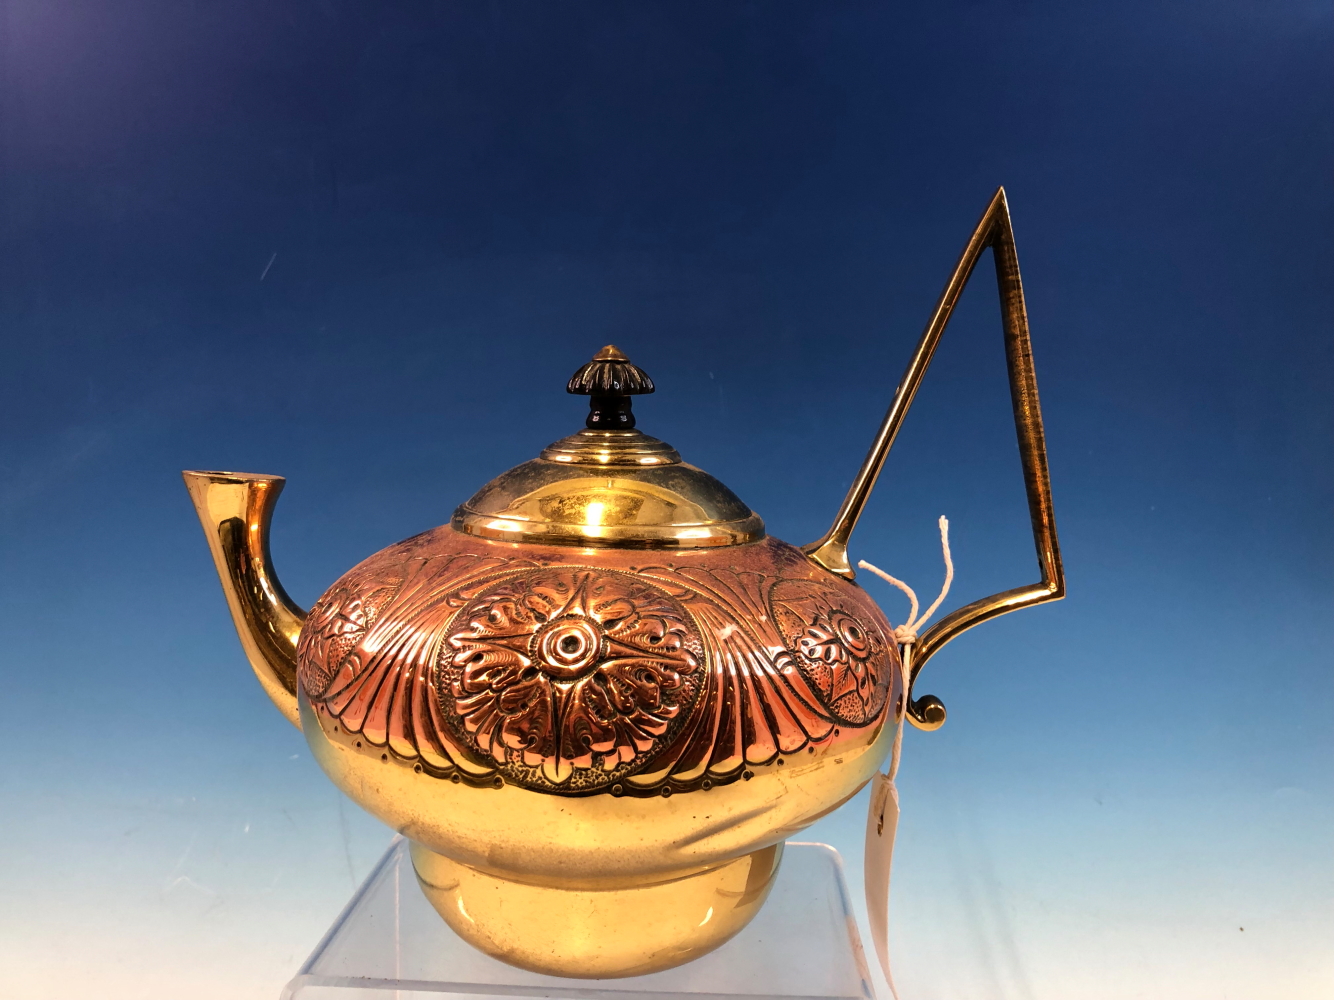 AN ARTS AND CRAFTS PERIOD COPPER AND BRASS KETTLE BY WILLIAM SOUTER AND SONS